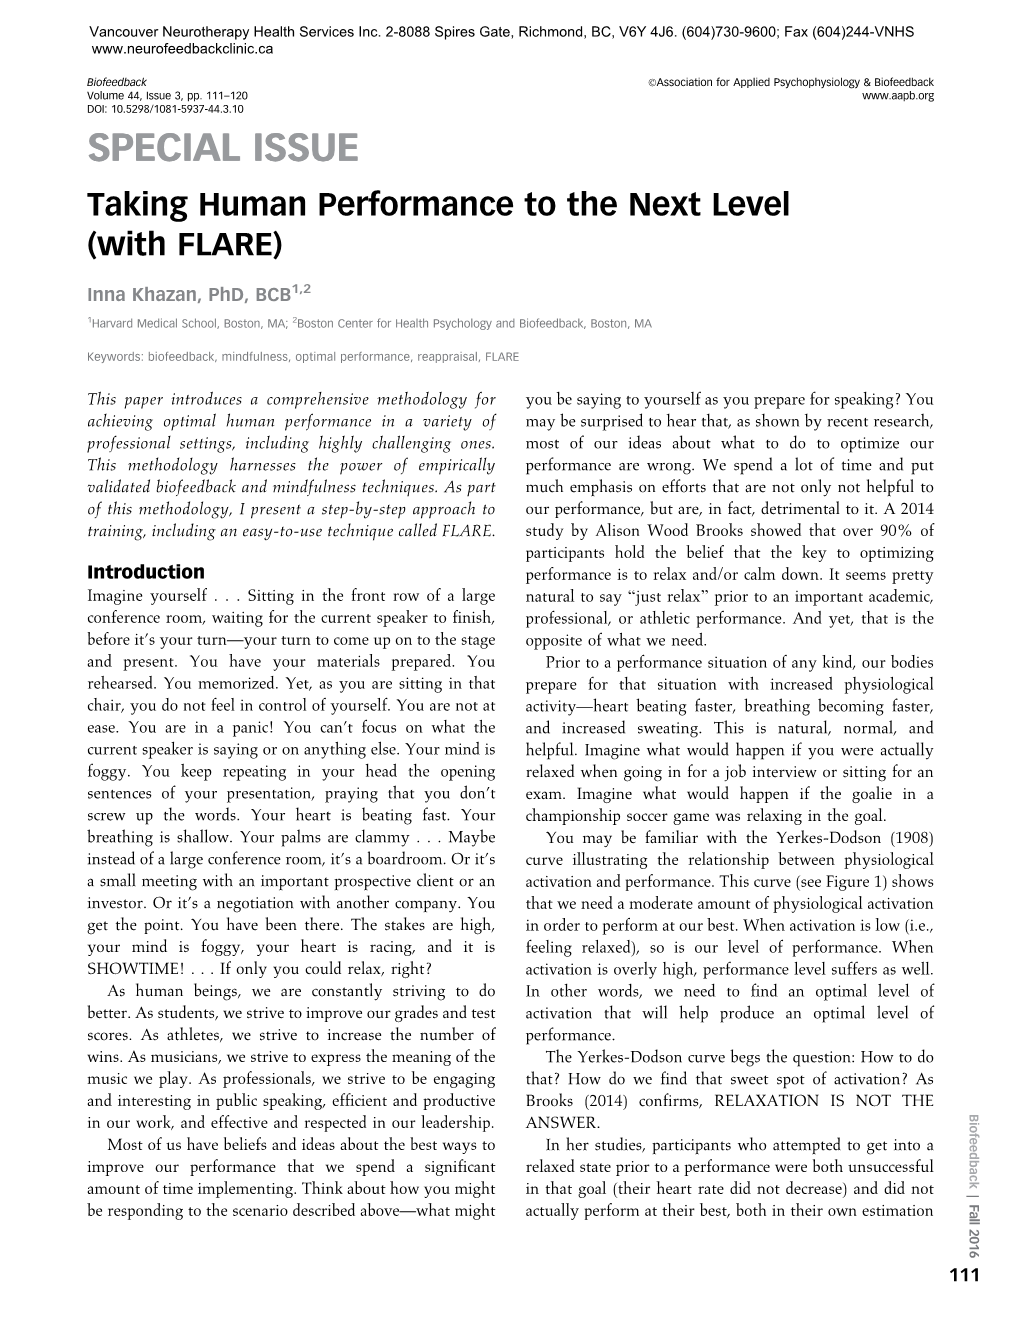 SPECIAL ISSUE Taking Human Performance to the Next Level (With FLARE)